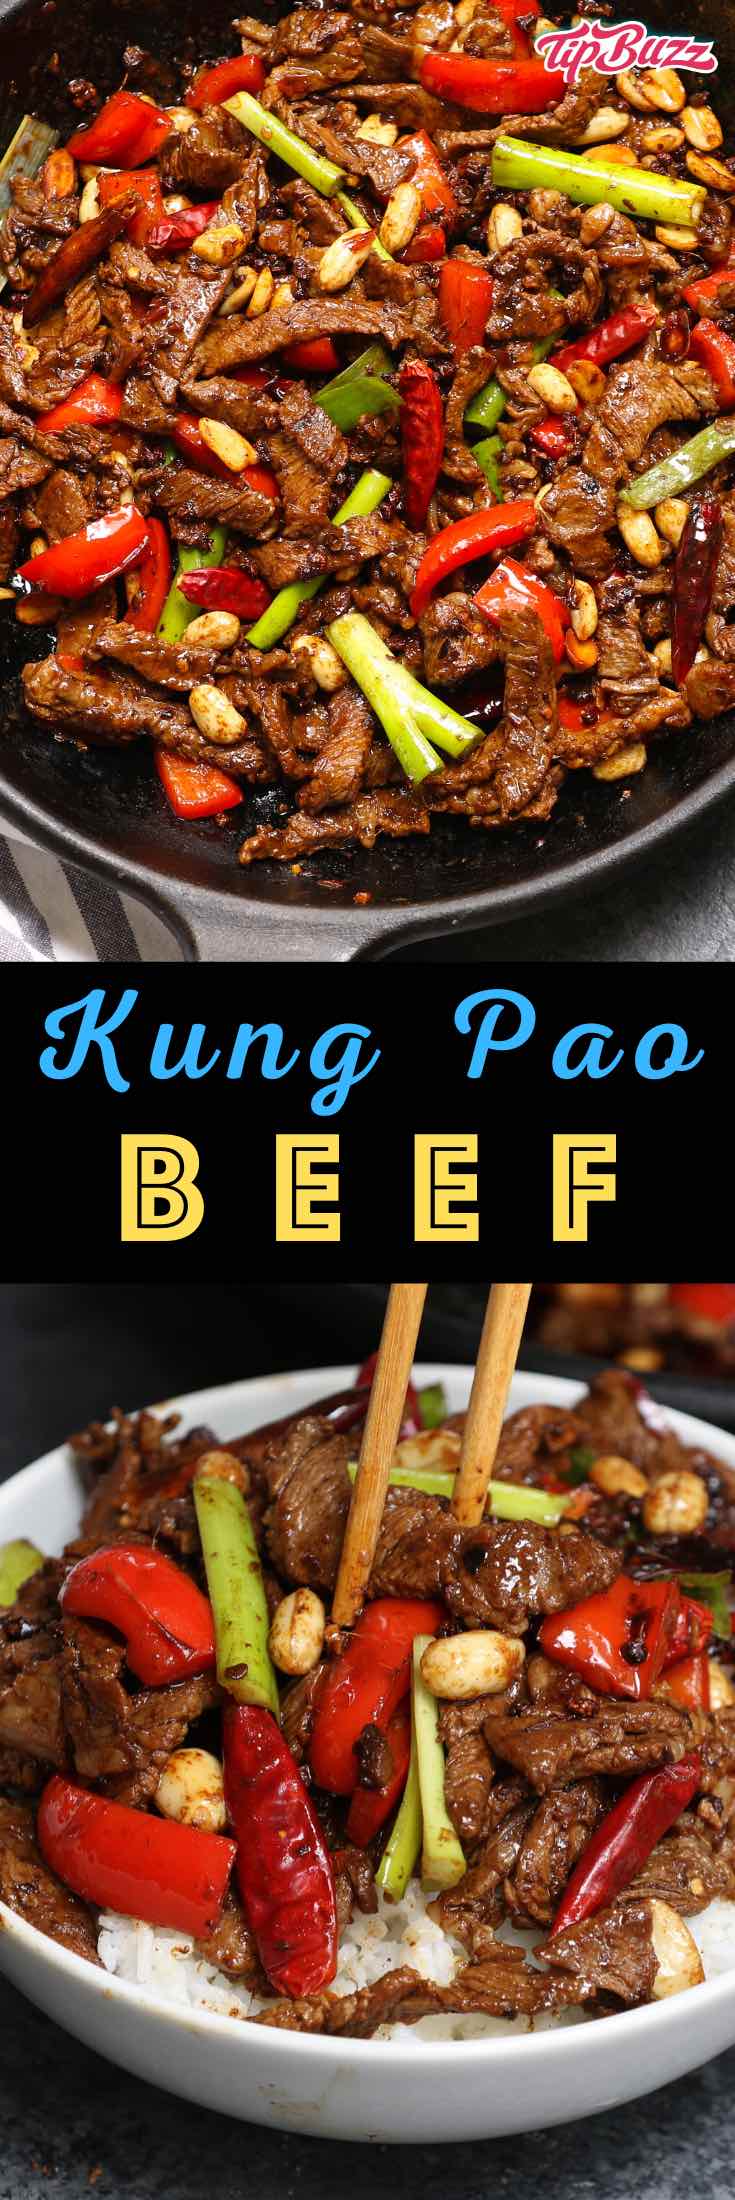 Kung Pao Beef is a fiery Szechuan dish with sweet and savory flavors just like kung pao chicken! Tender strips of beef are combined with seasonings and vegetables in this delicious stir-fry! #szechuanbeef #kungpaobeef